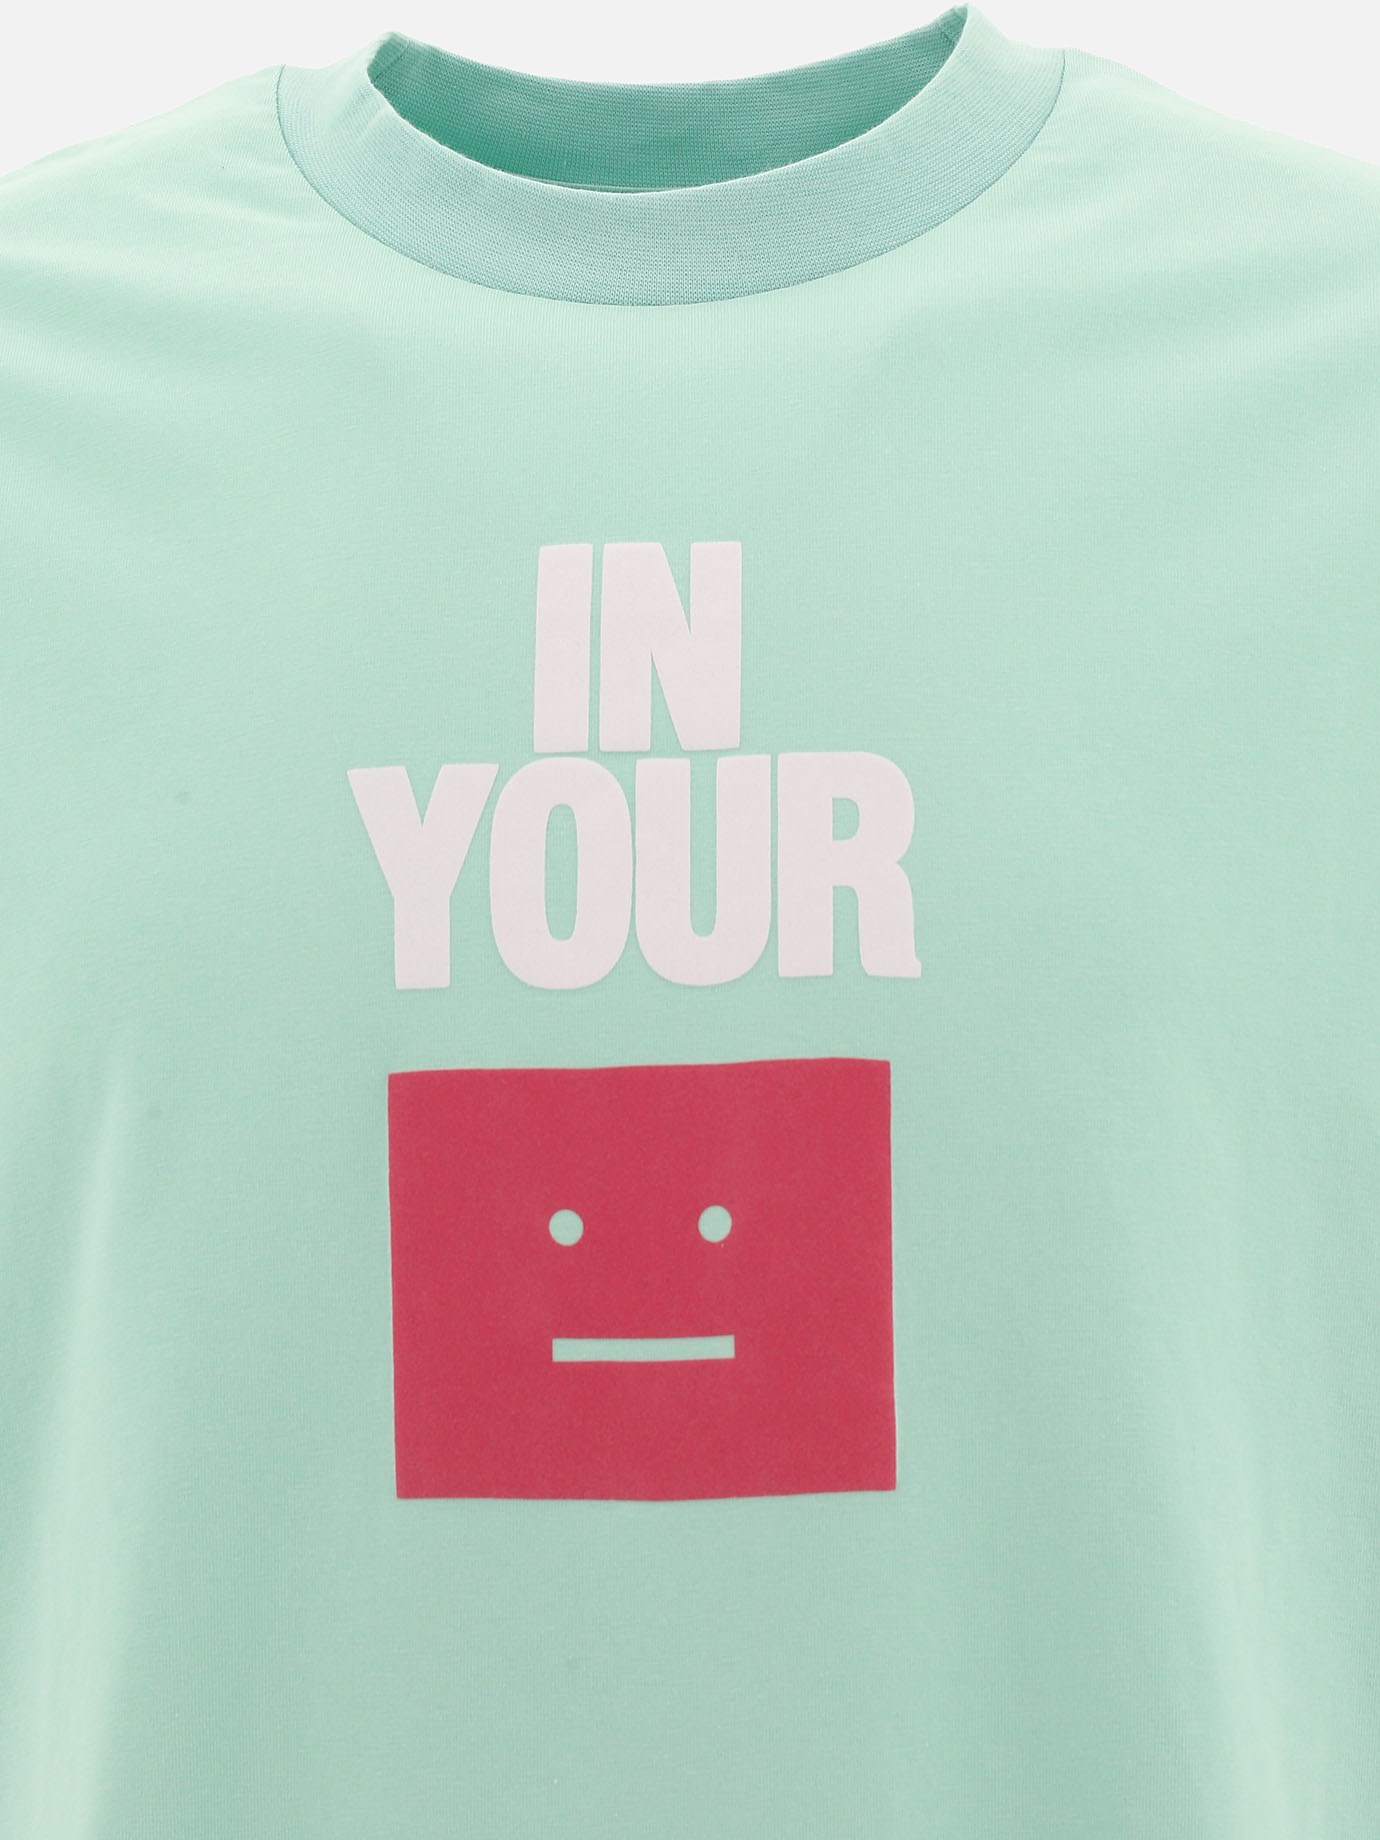  In Your Face  t-shirt by Acne Studios